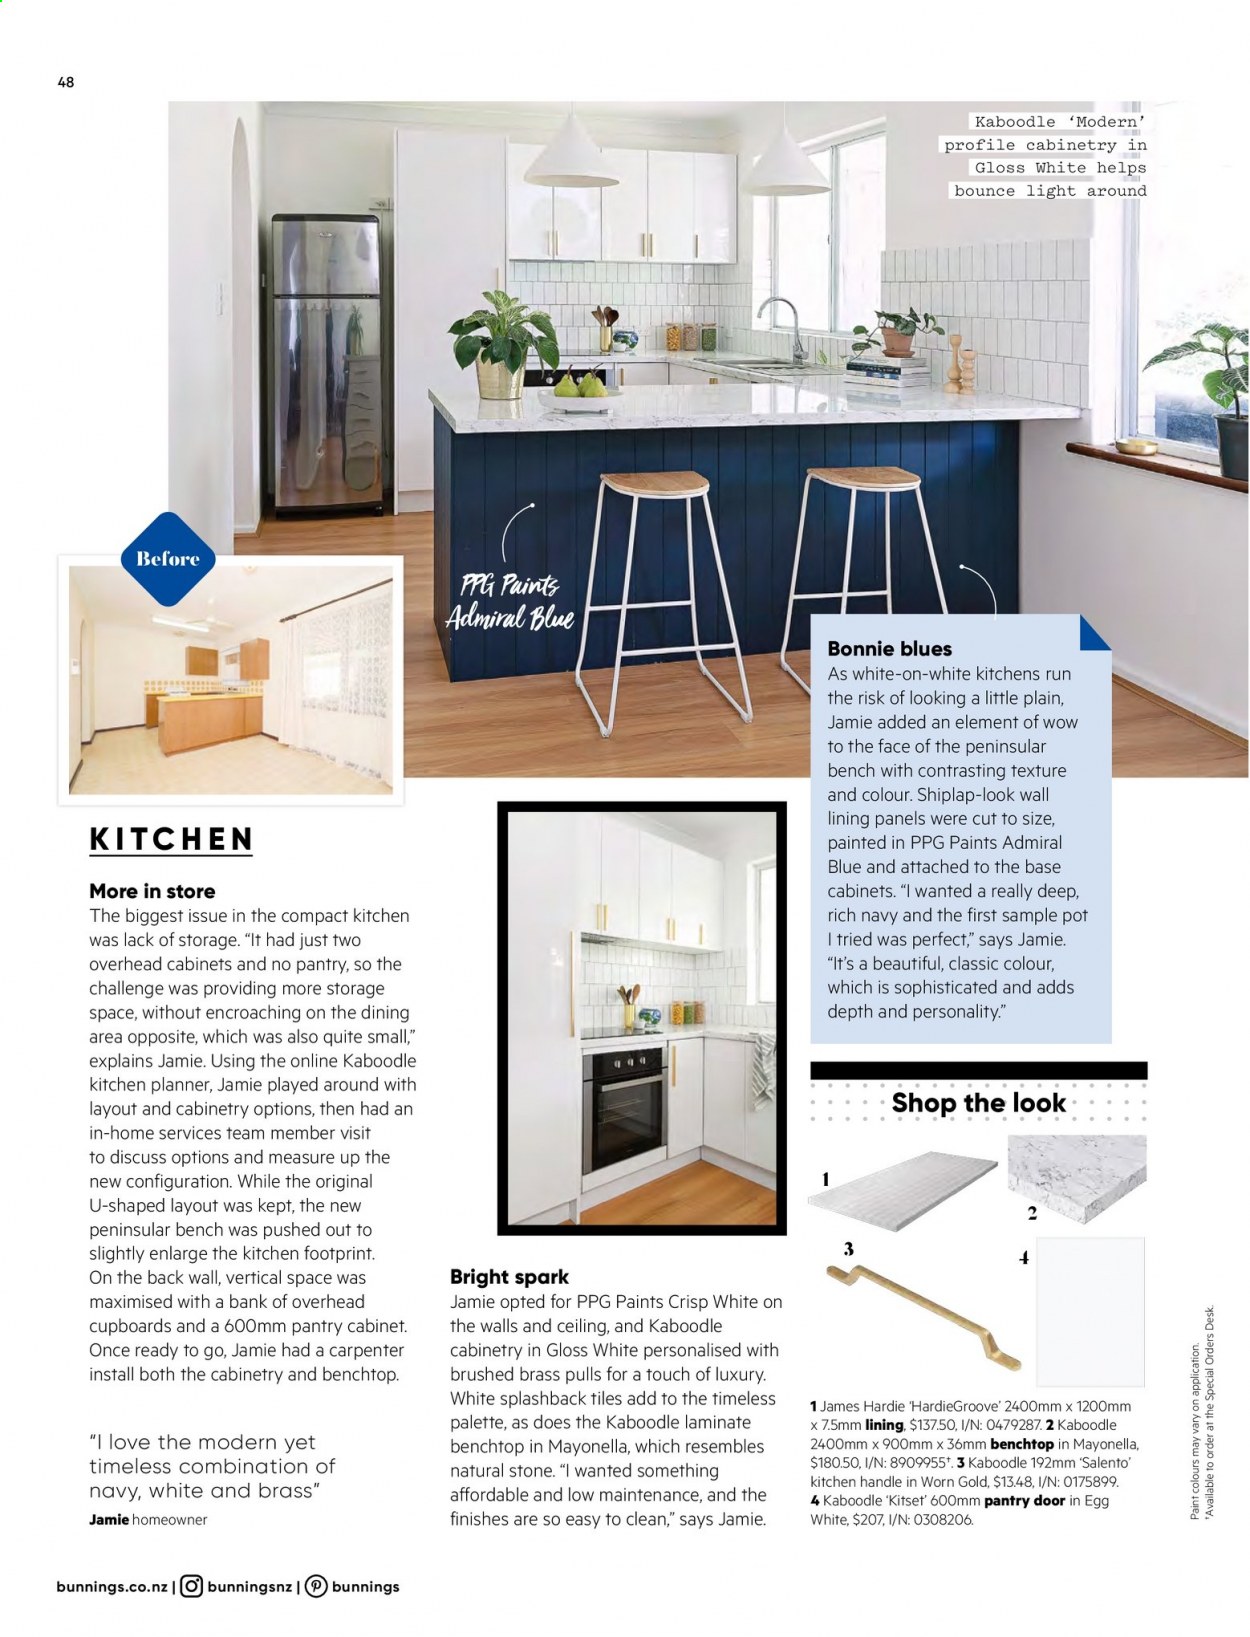 thumbnail - Bunnings Warehouse mailer - Sales products - cabinet, bench, Lack, paint, shiplap, door. Page 48.